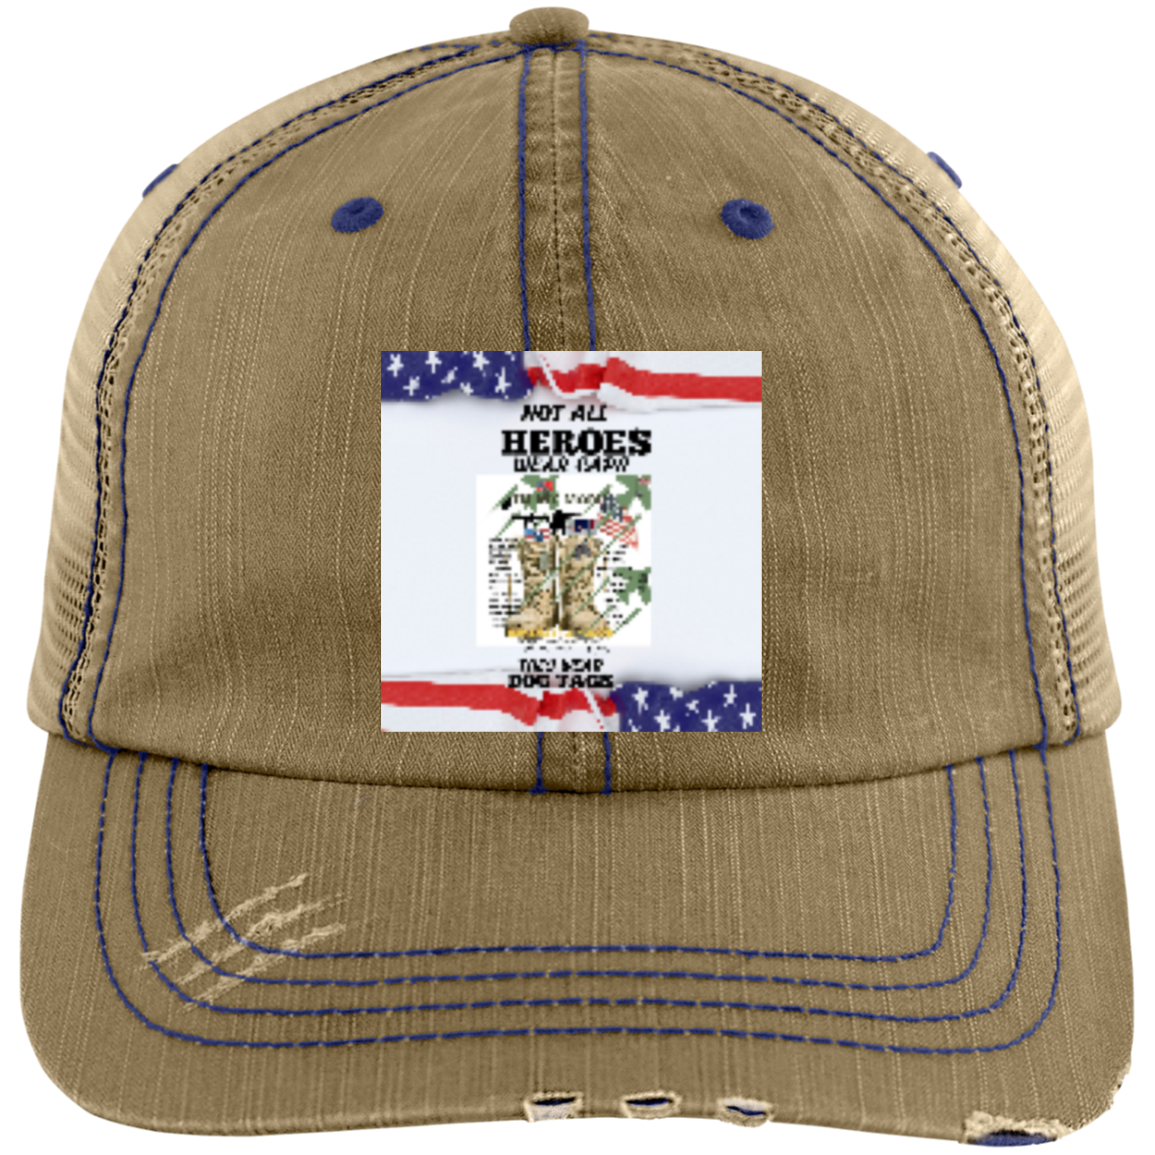 NOT ALL HEROES WEAR HATS-DOG TAG-6990 Distressed Unstructured Trucker Cap